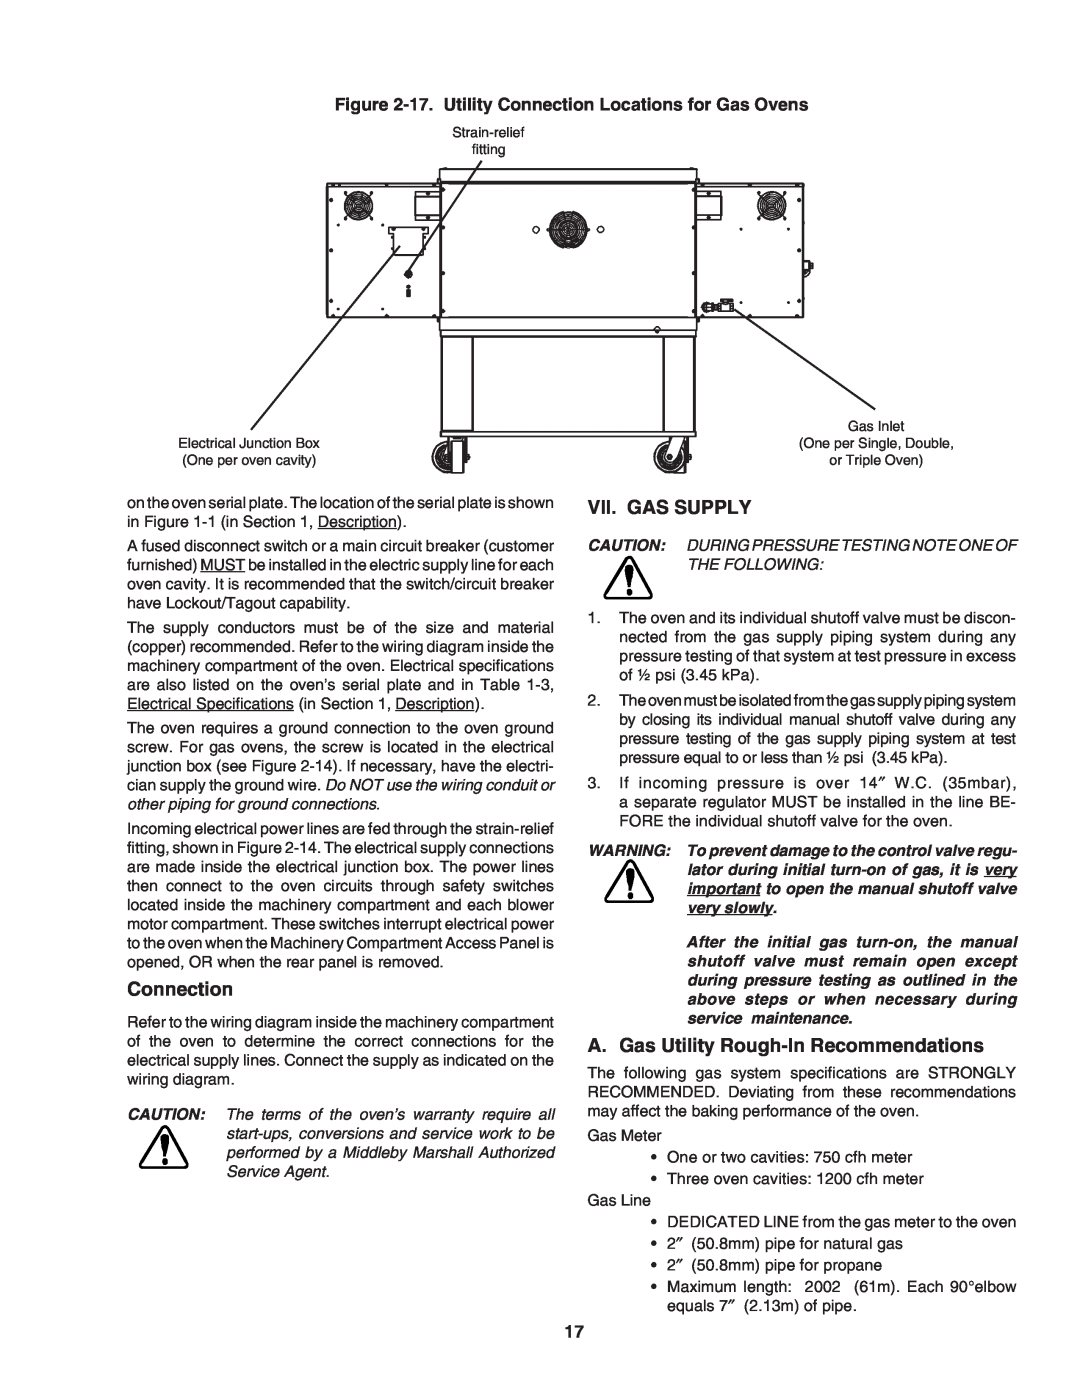 Middleby Marshall PS840 Series installation manual Connection, Vii. Gas Supply, A. Gas Utility Rough-In Recommendations 